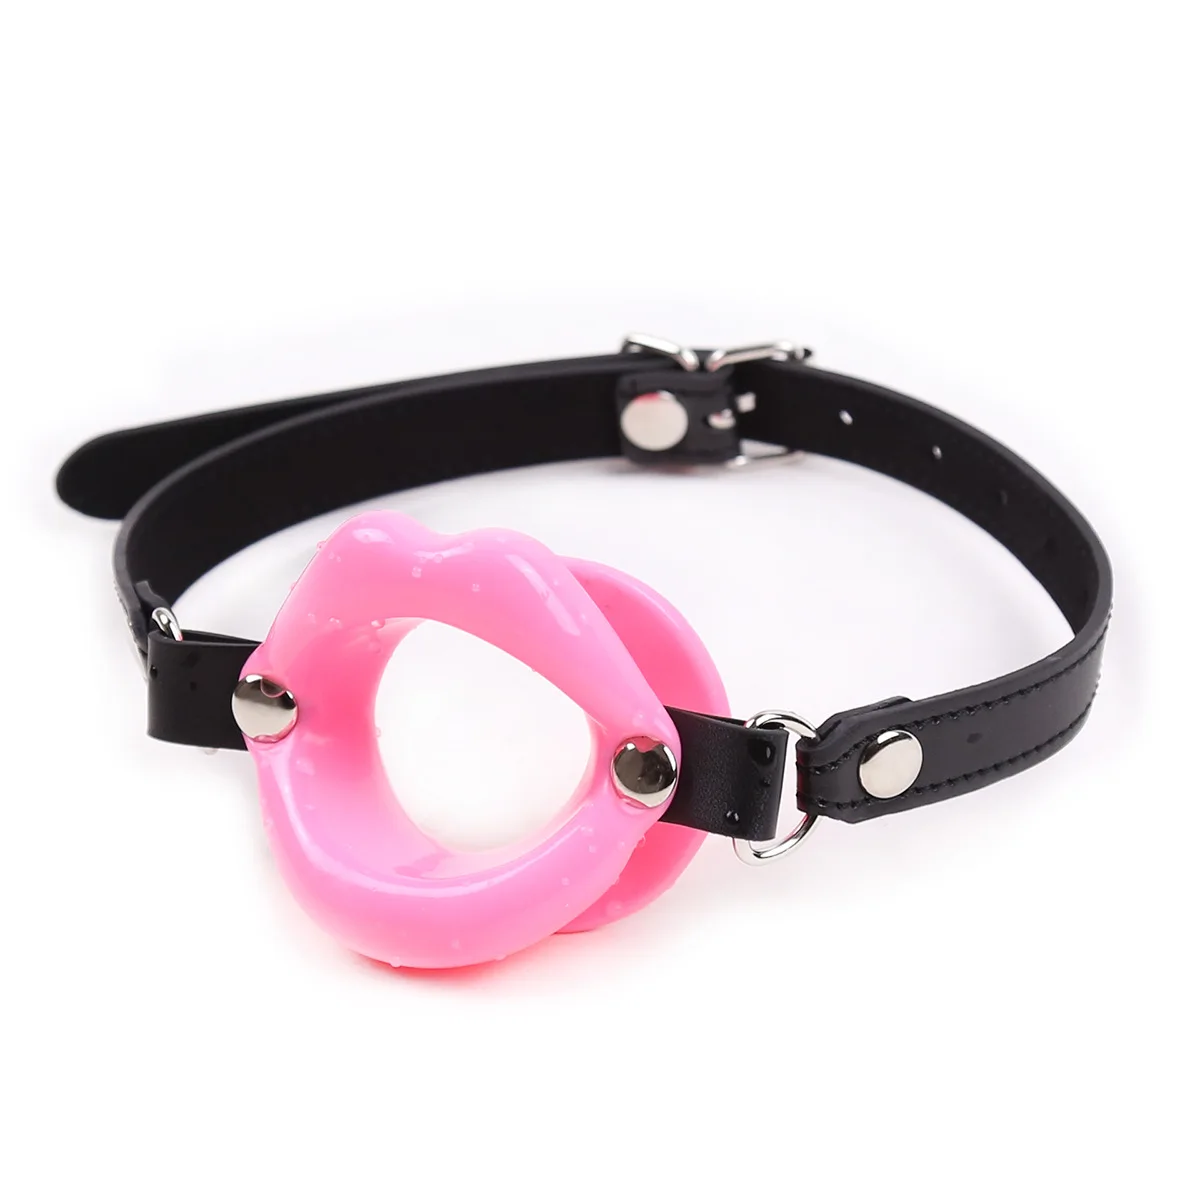 PU Leather Silicone Mouth Ball BDSM Bondage Lips Ring Open Gag Ball Adult Slave Erotic